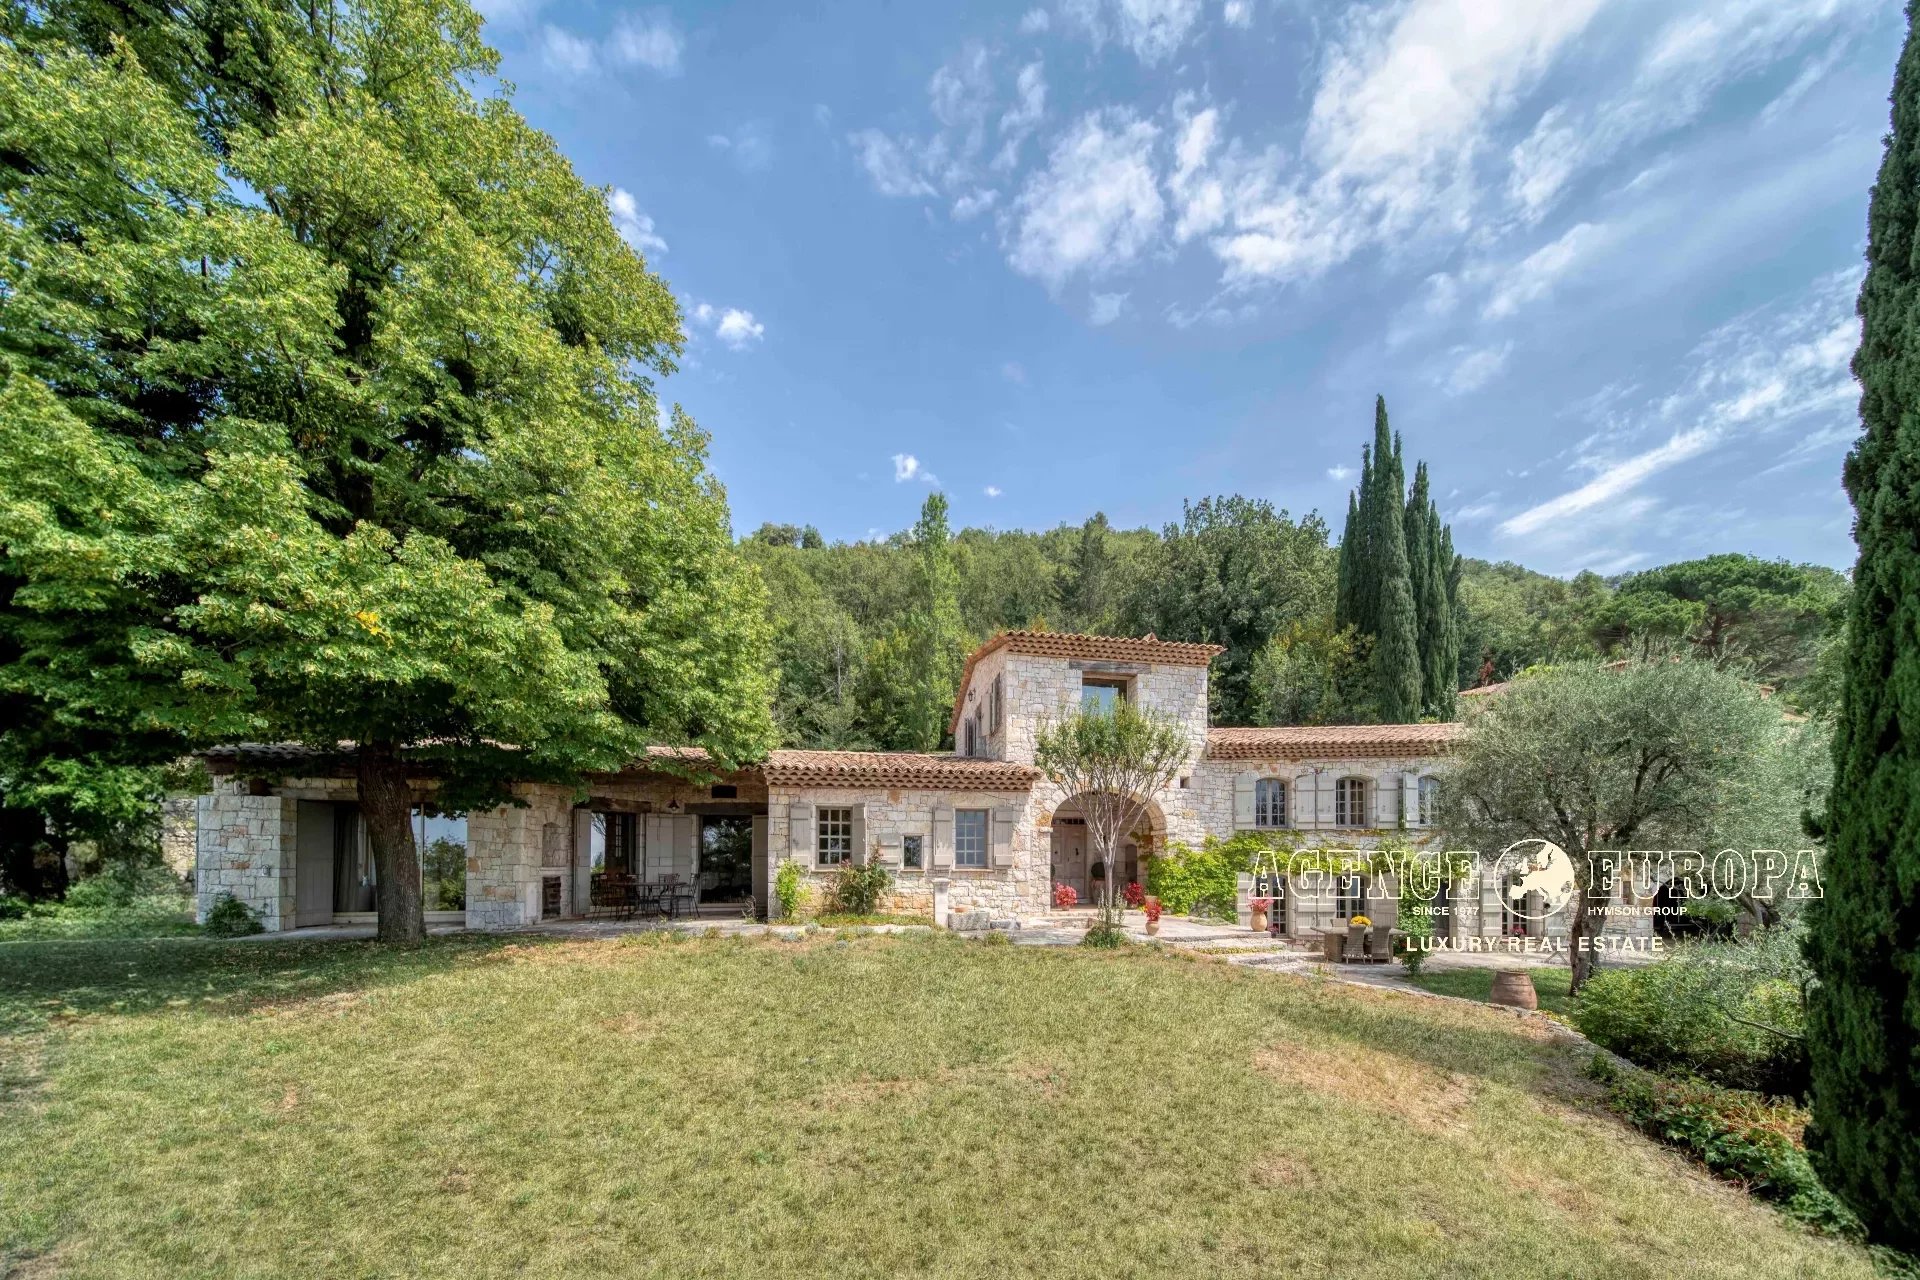 CANNES HINTERLAND - SUPERB "BASTIDE" STYLE STONE HOUSE - PANORAMIC VIEW